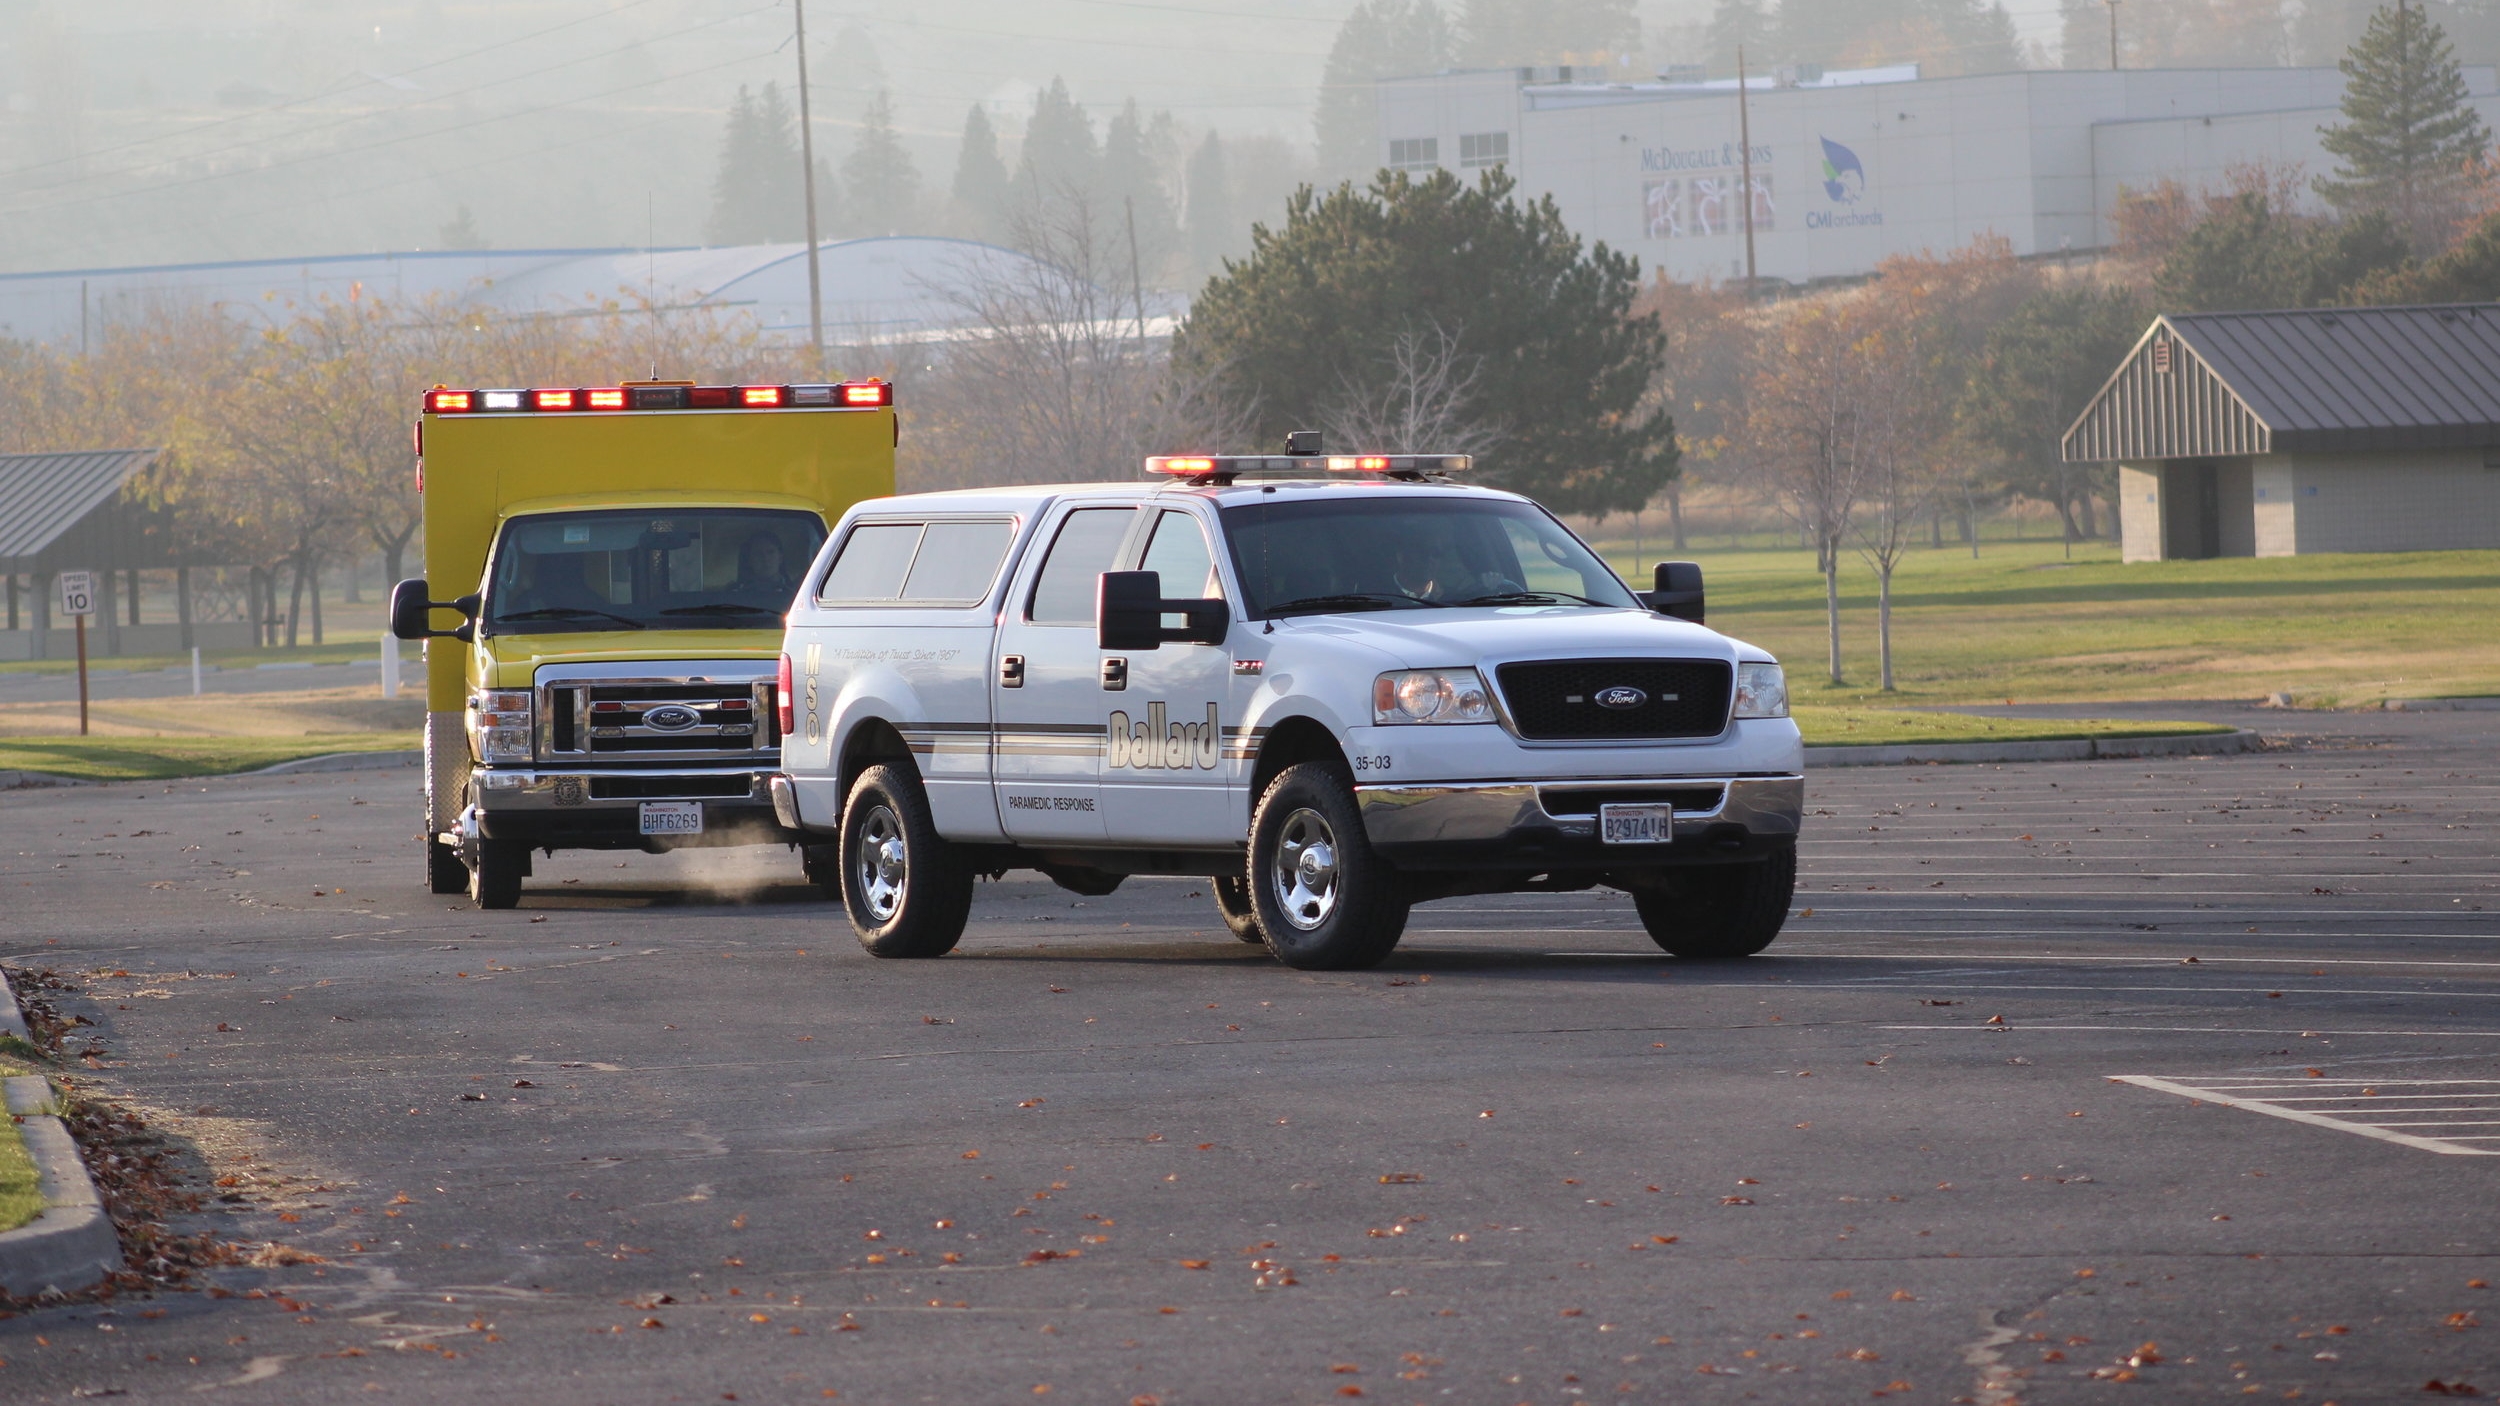 The largest provider of EMS in the Greater Wenatchee Valley